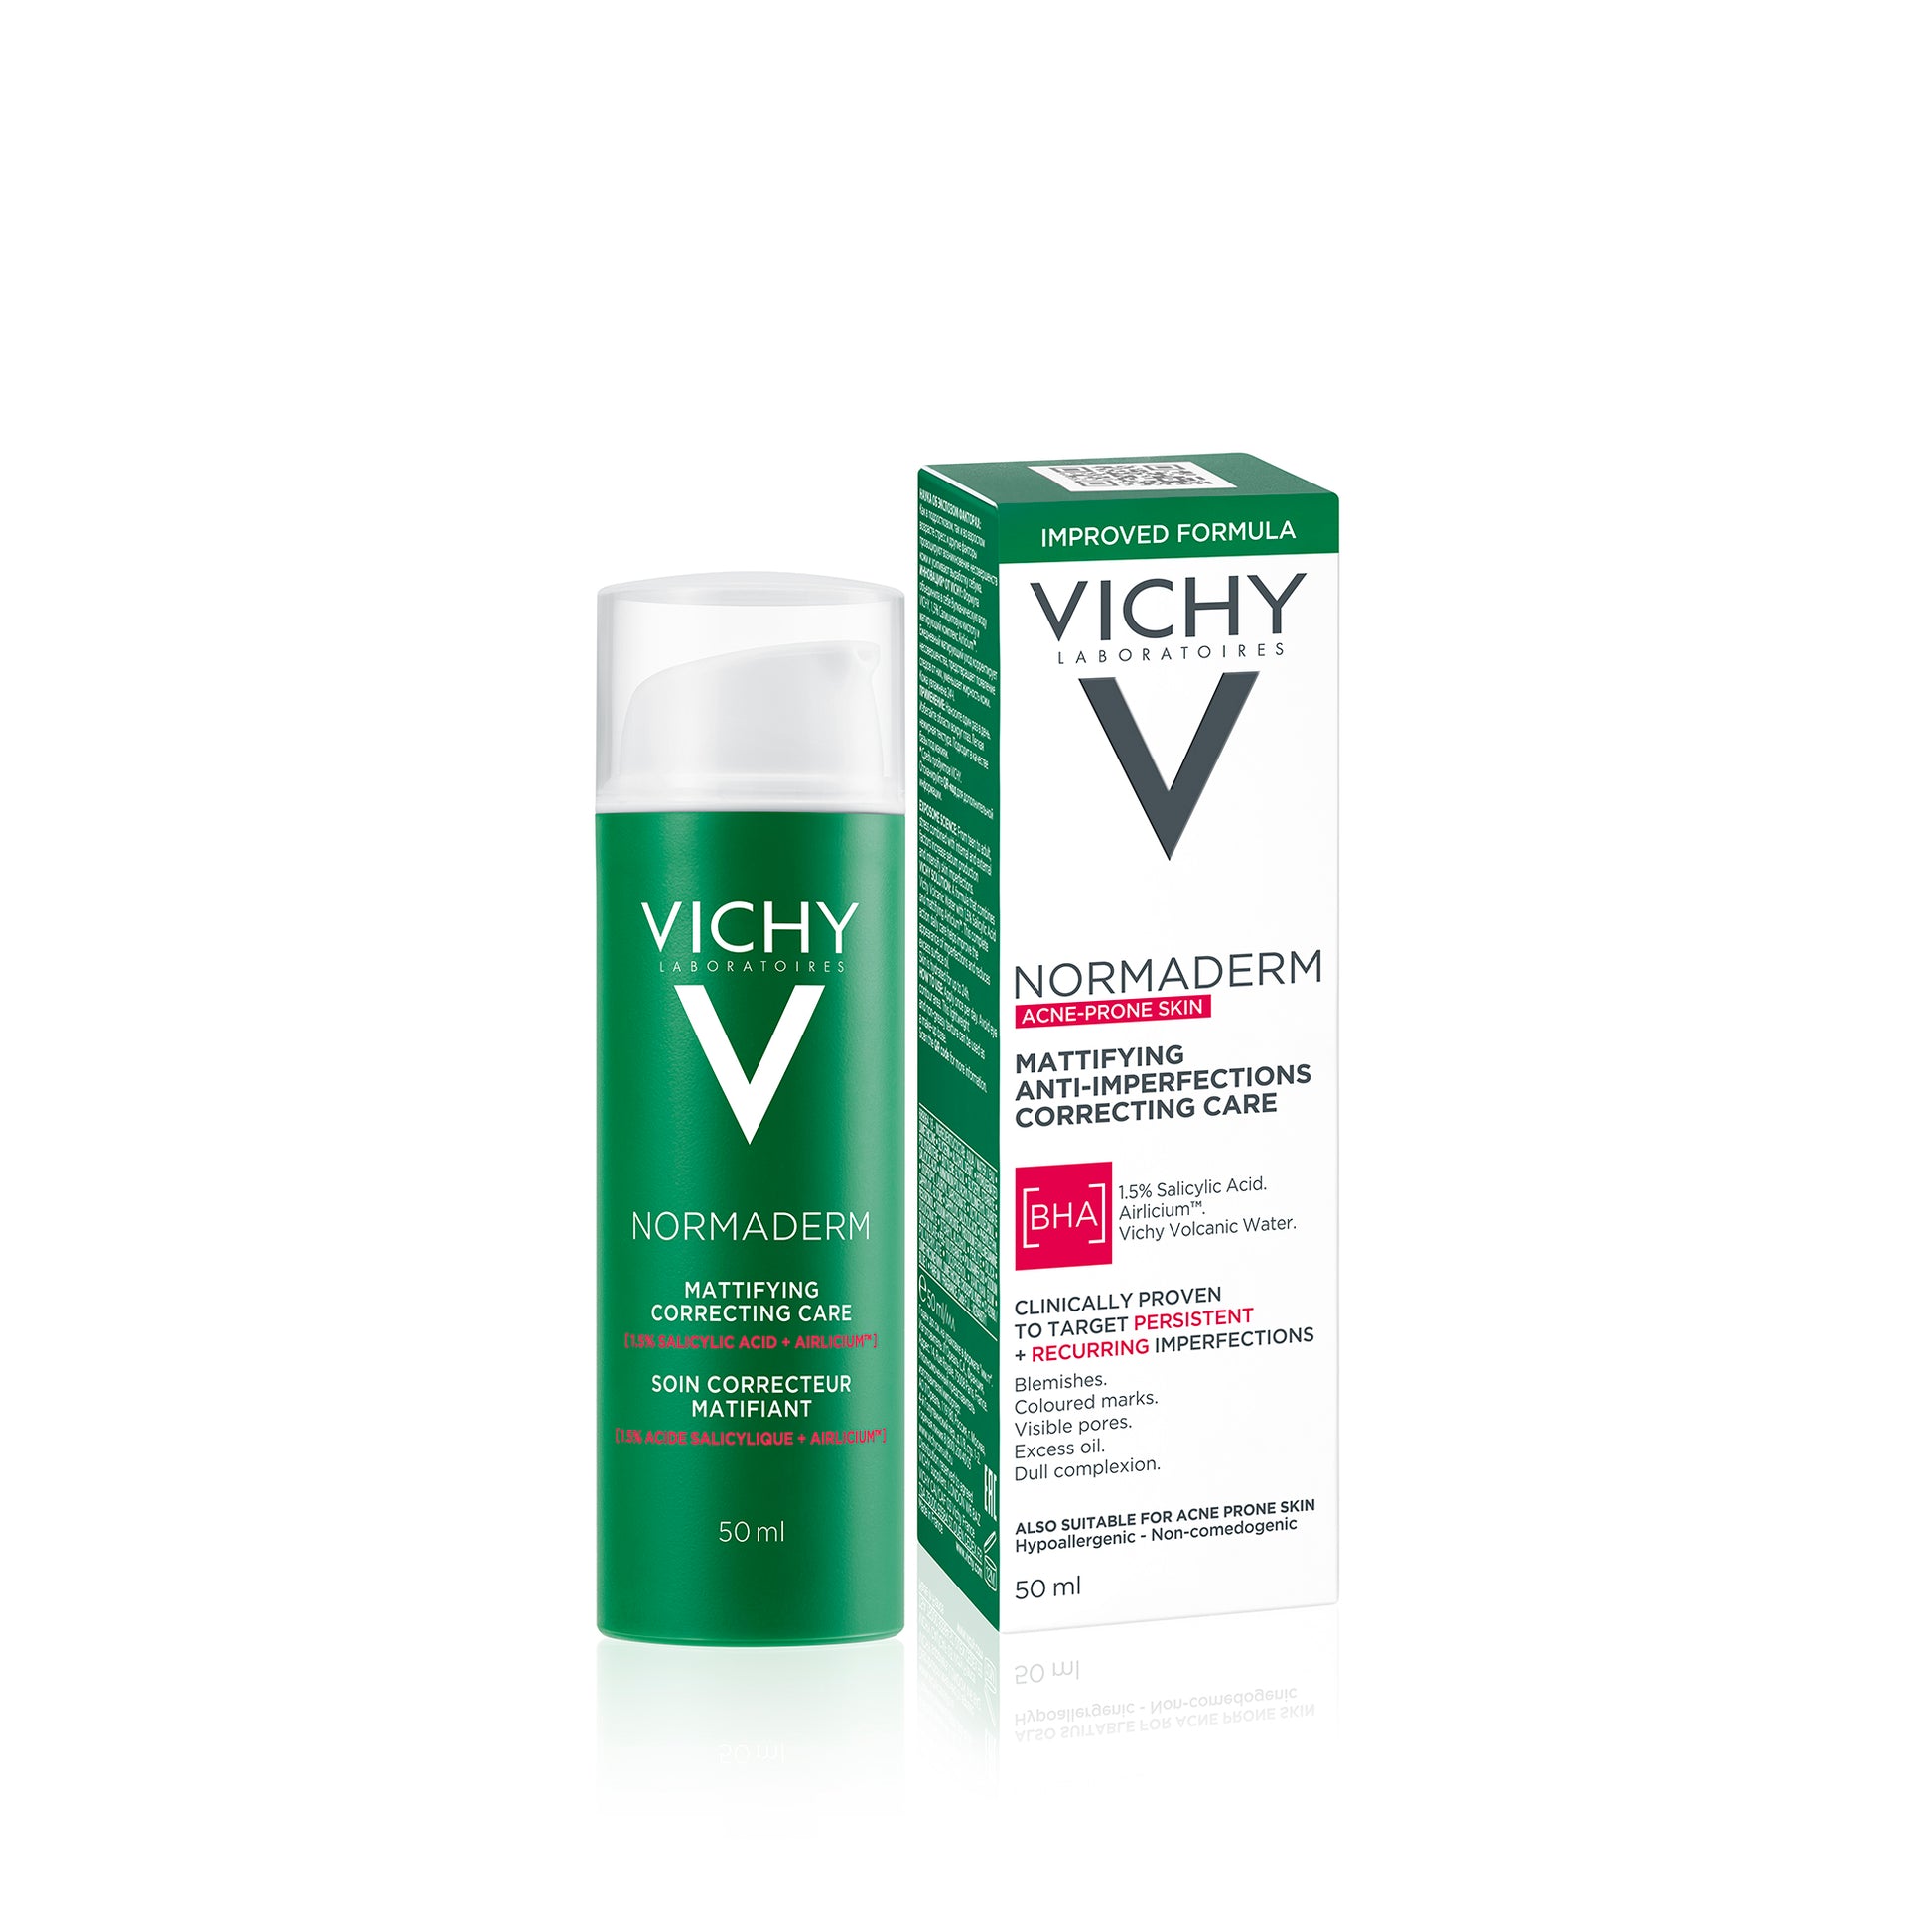 VICHY Normaderm Mattifying Correcting Care kasvovoide 50 ml